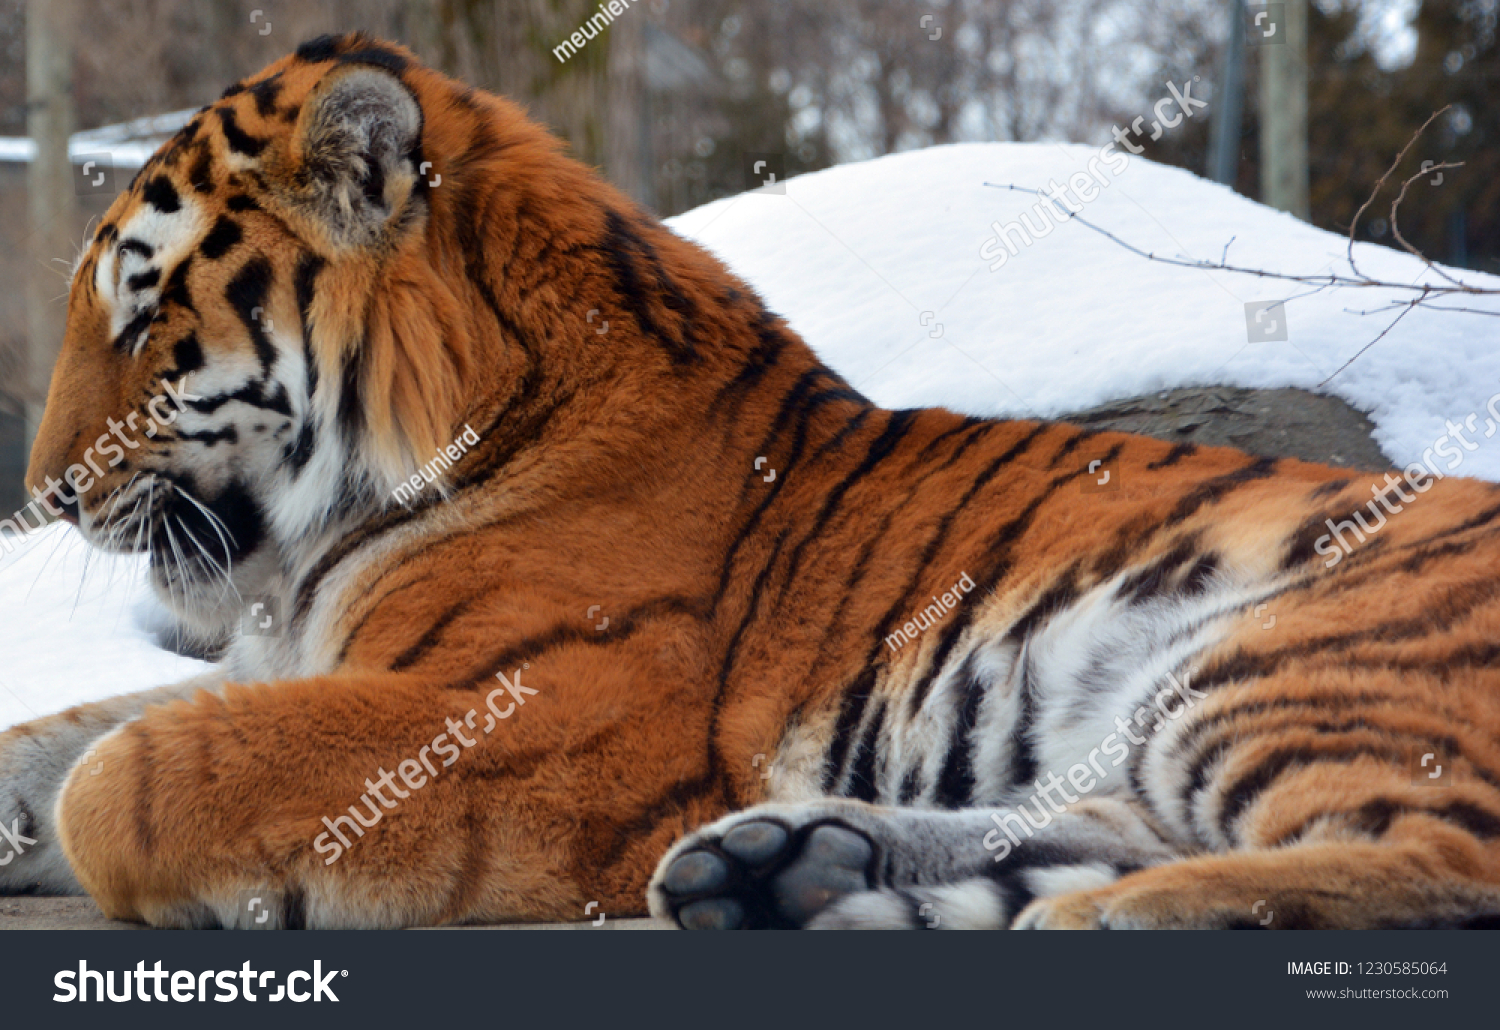 Amur Siberian tiger is a Panthera tigris tigris population in the Far East, particularly the Russian Far East and Northeast China #1230585064